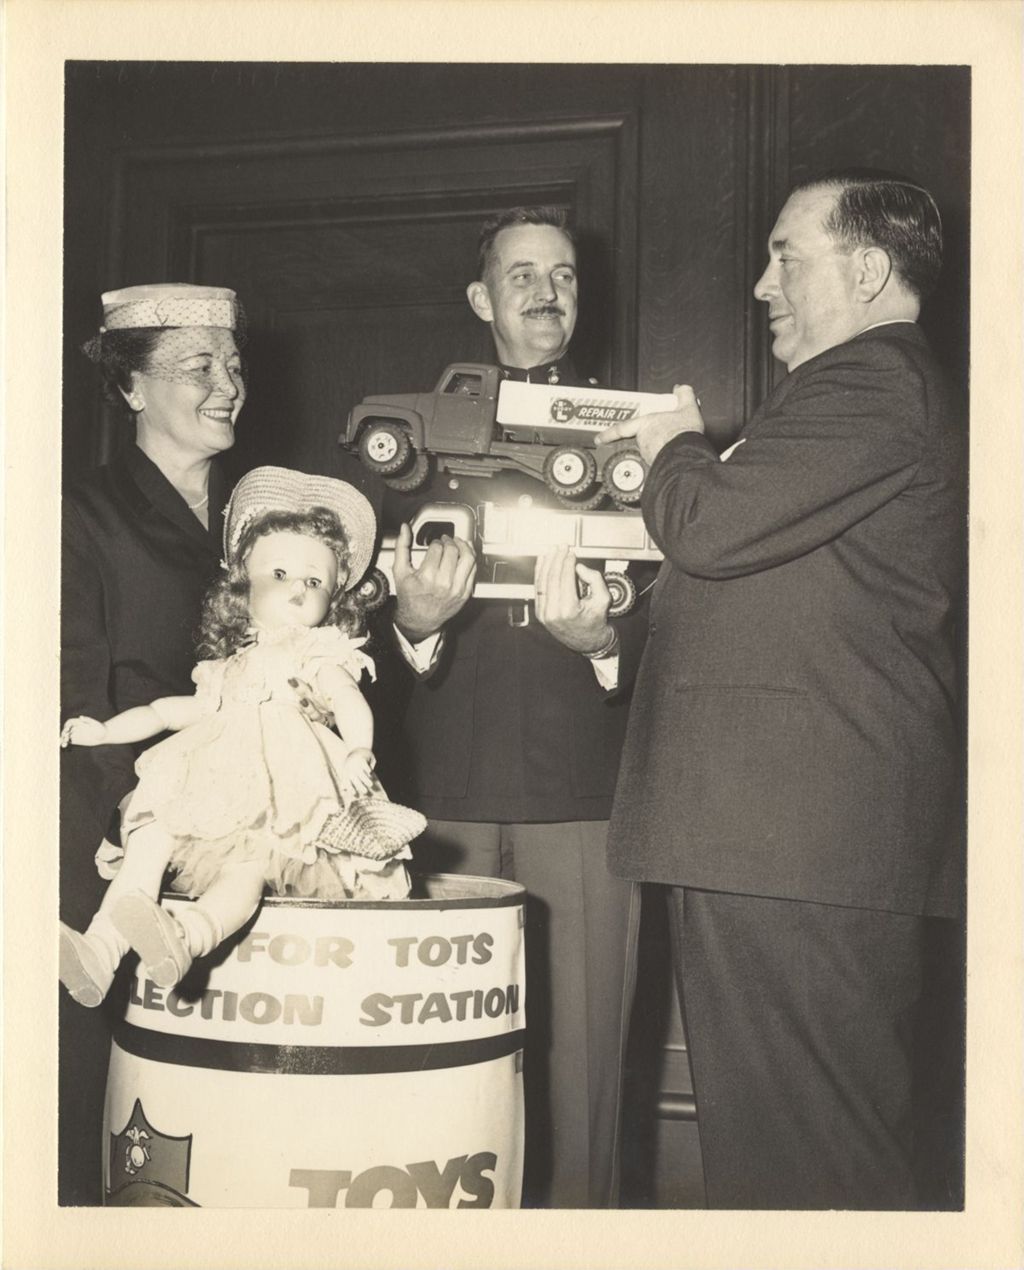 Miniature of Eleanor and Richard J. Daley with toys for Toys for Tots